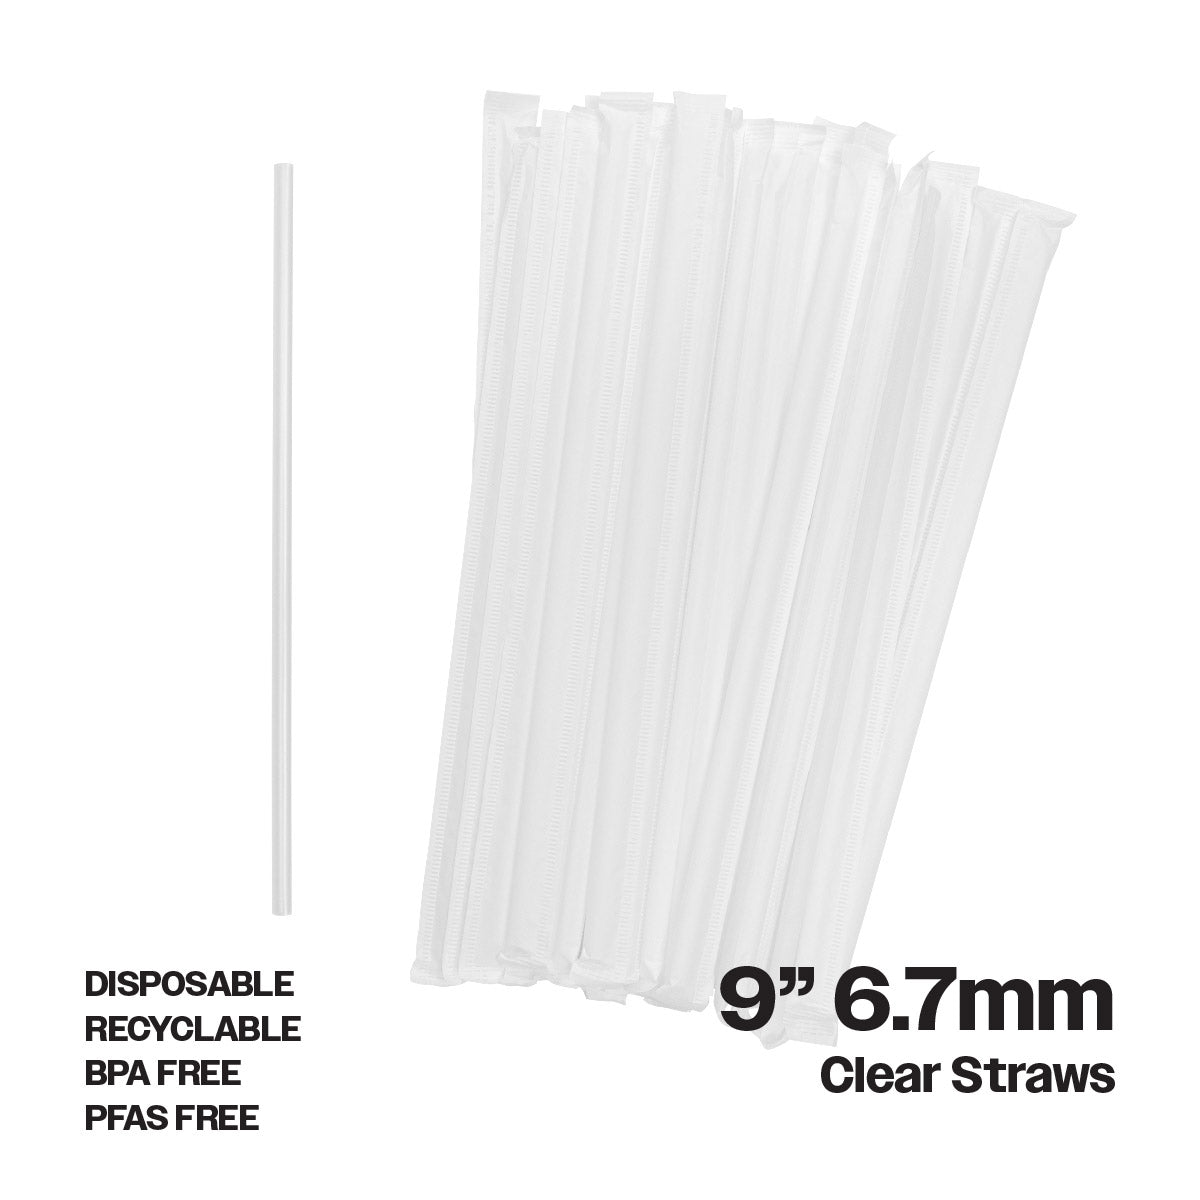 CIAO! 9 Clear Super Jumbo Straws .26 outside diameter(6.7mm) Paper  Wrapped 9,000/case…